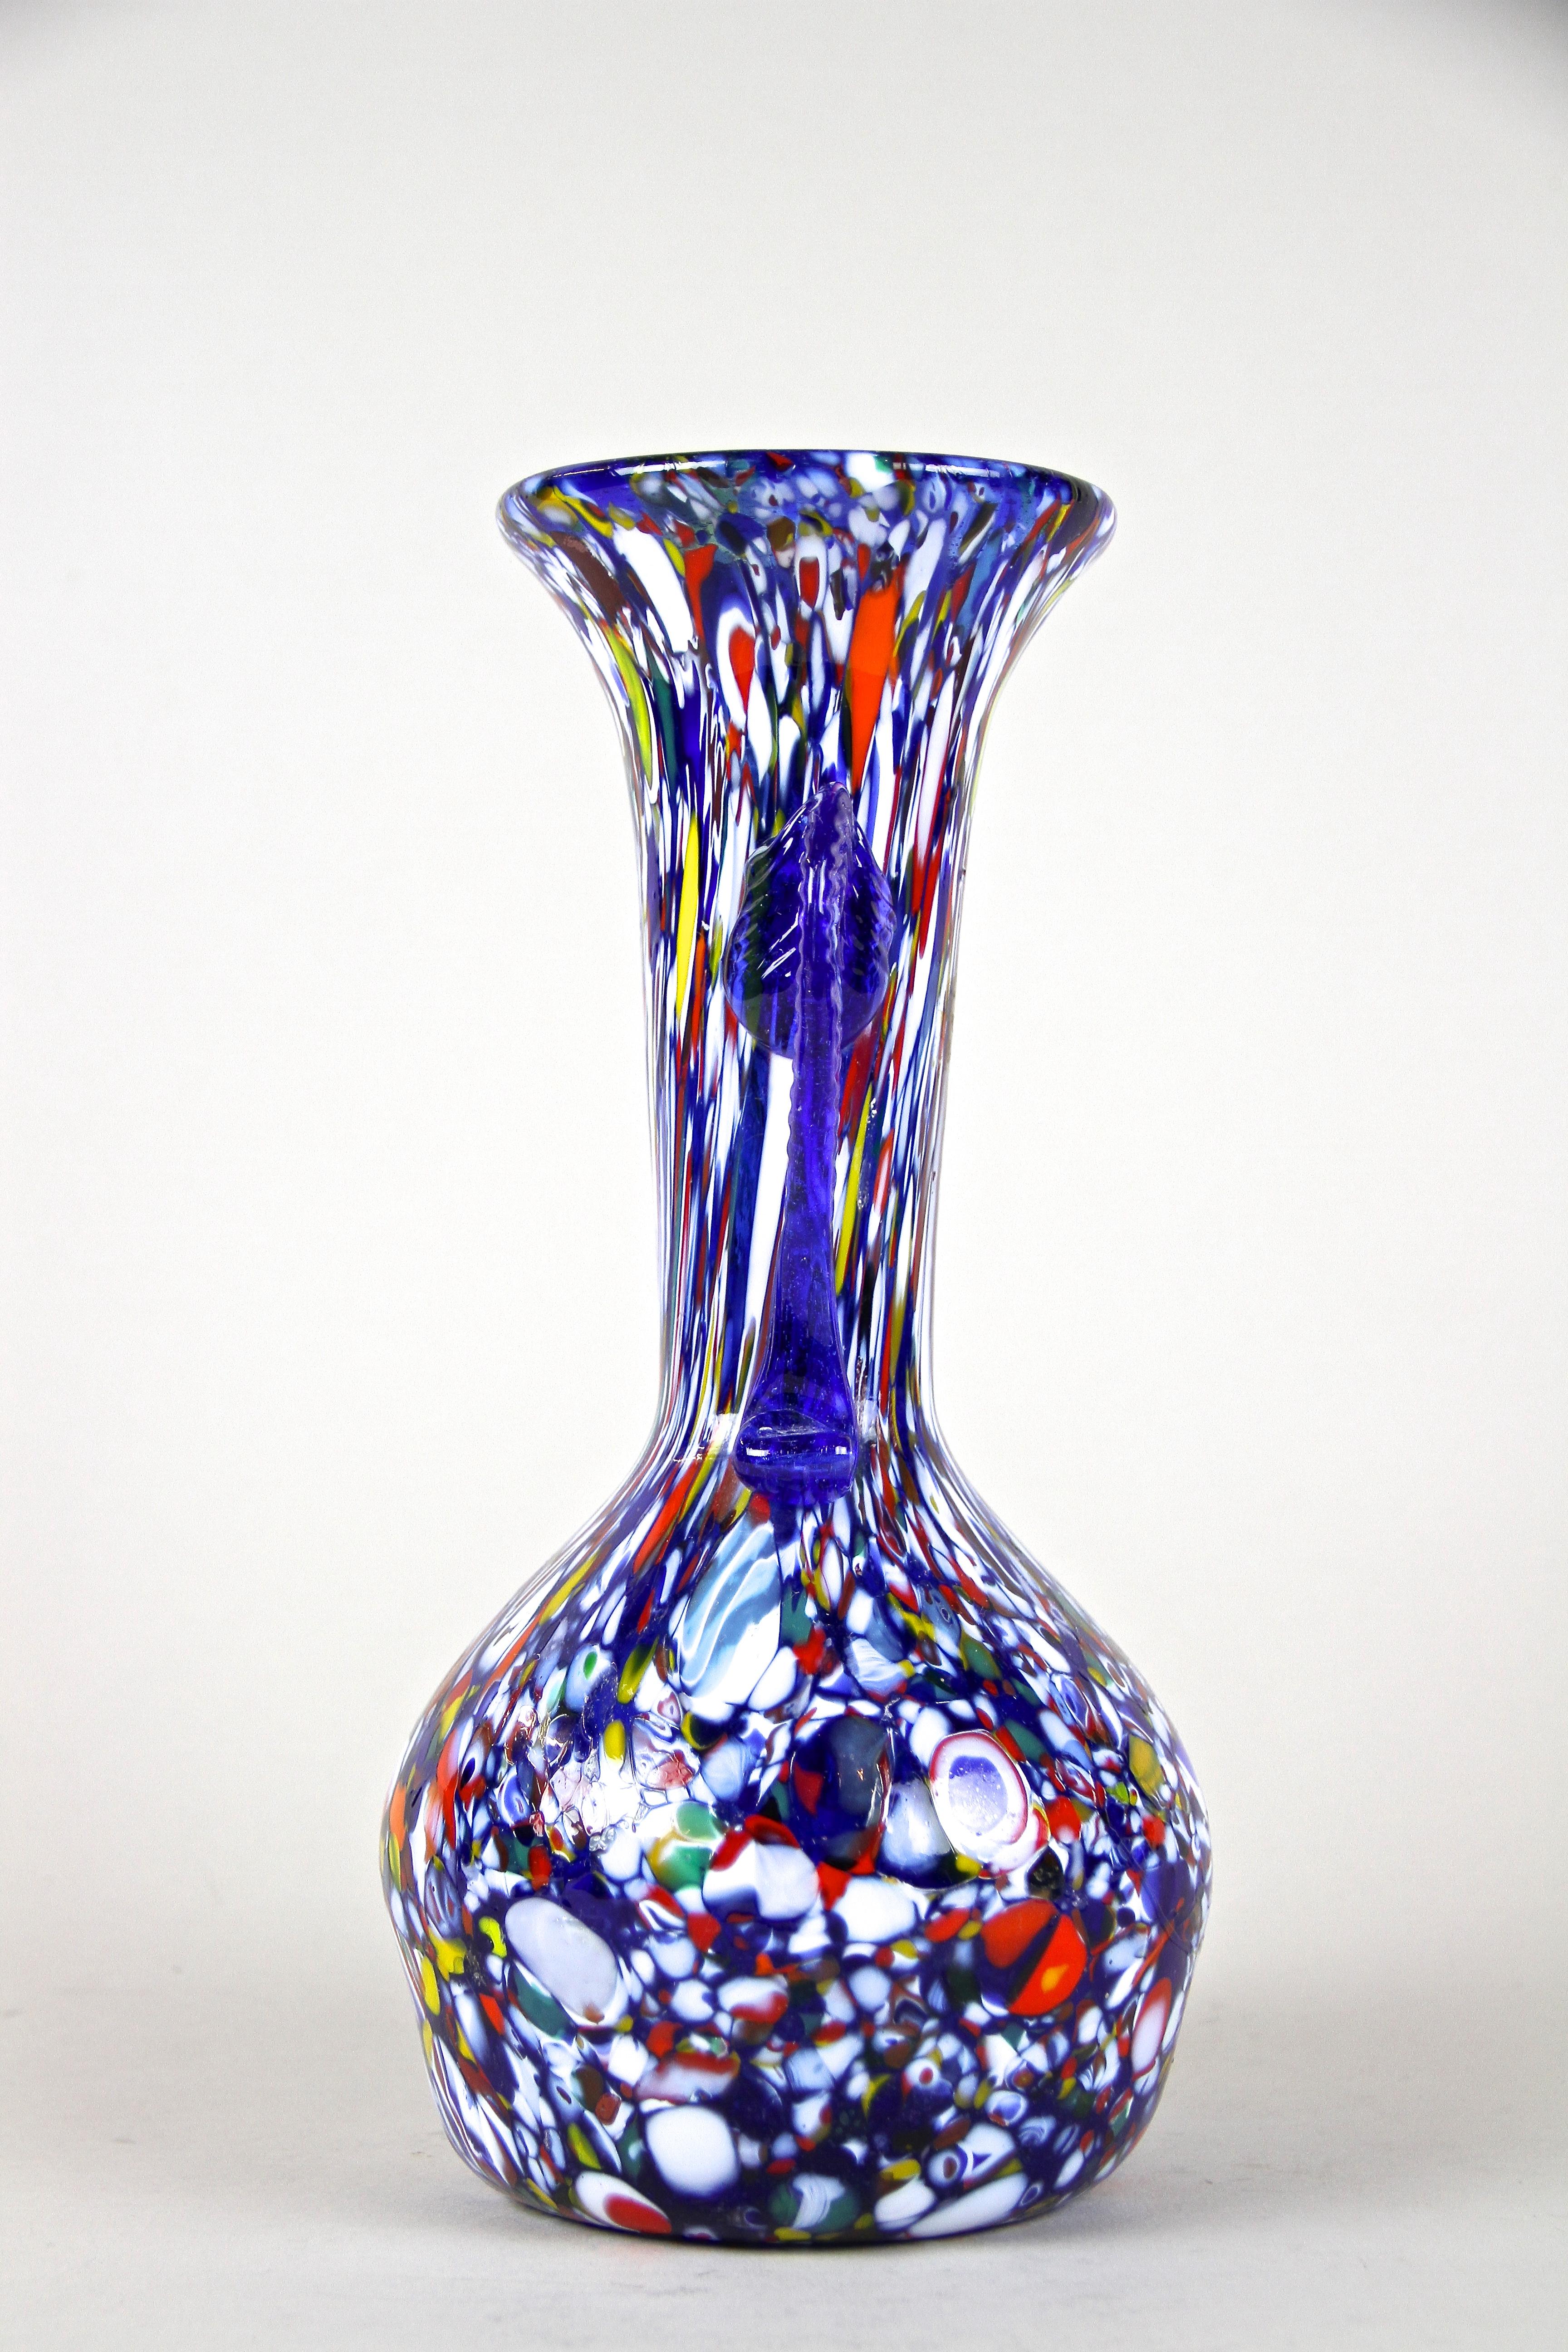 20th Century Mid-Century Multicolor Murano Glass Vase by Fratelli Toso, Italy, circa 1940/50 For Sale